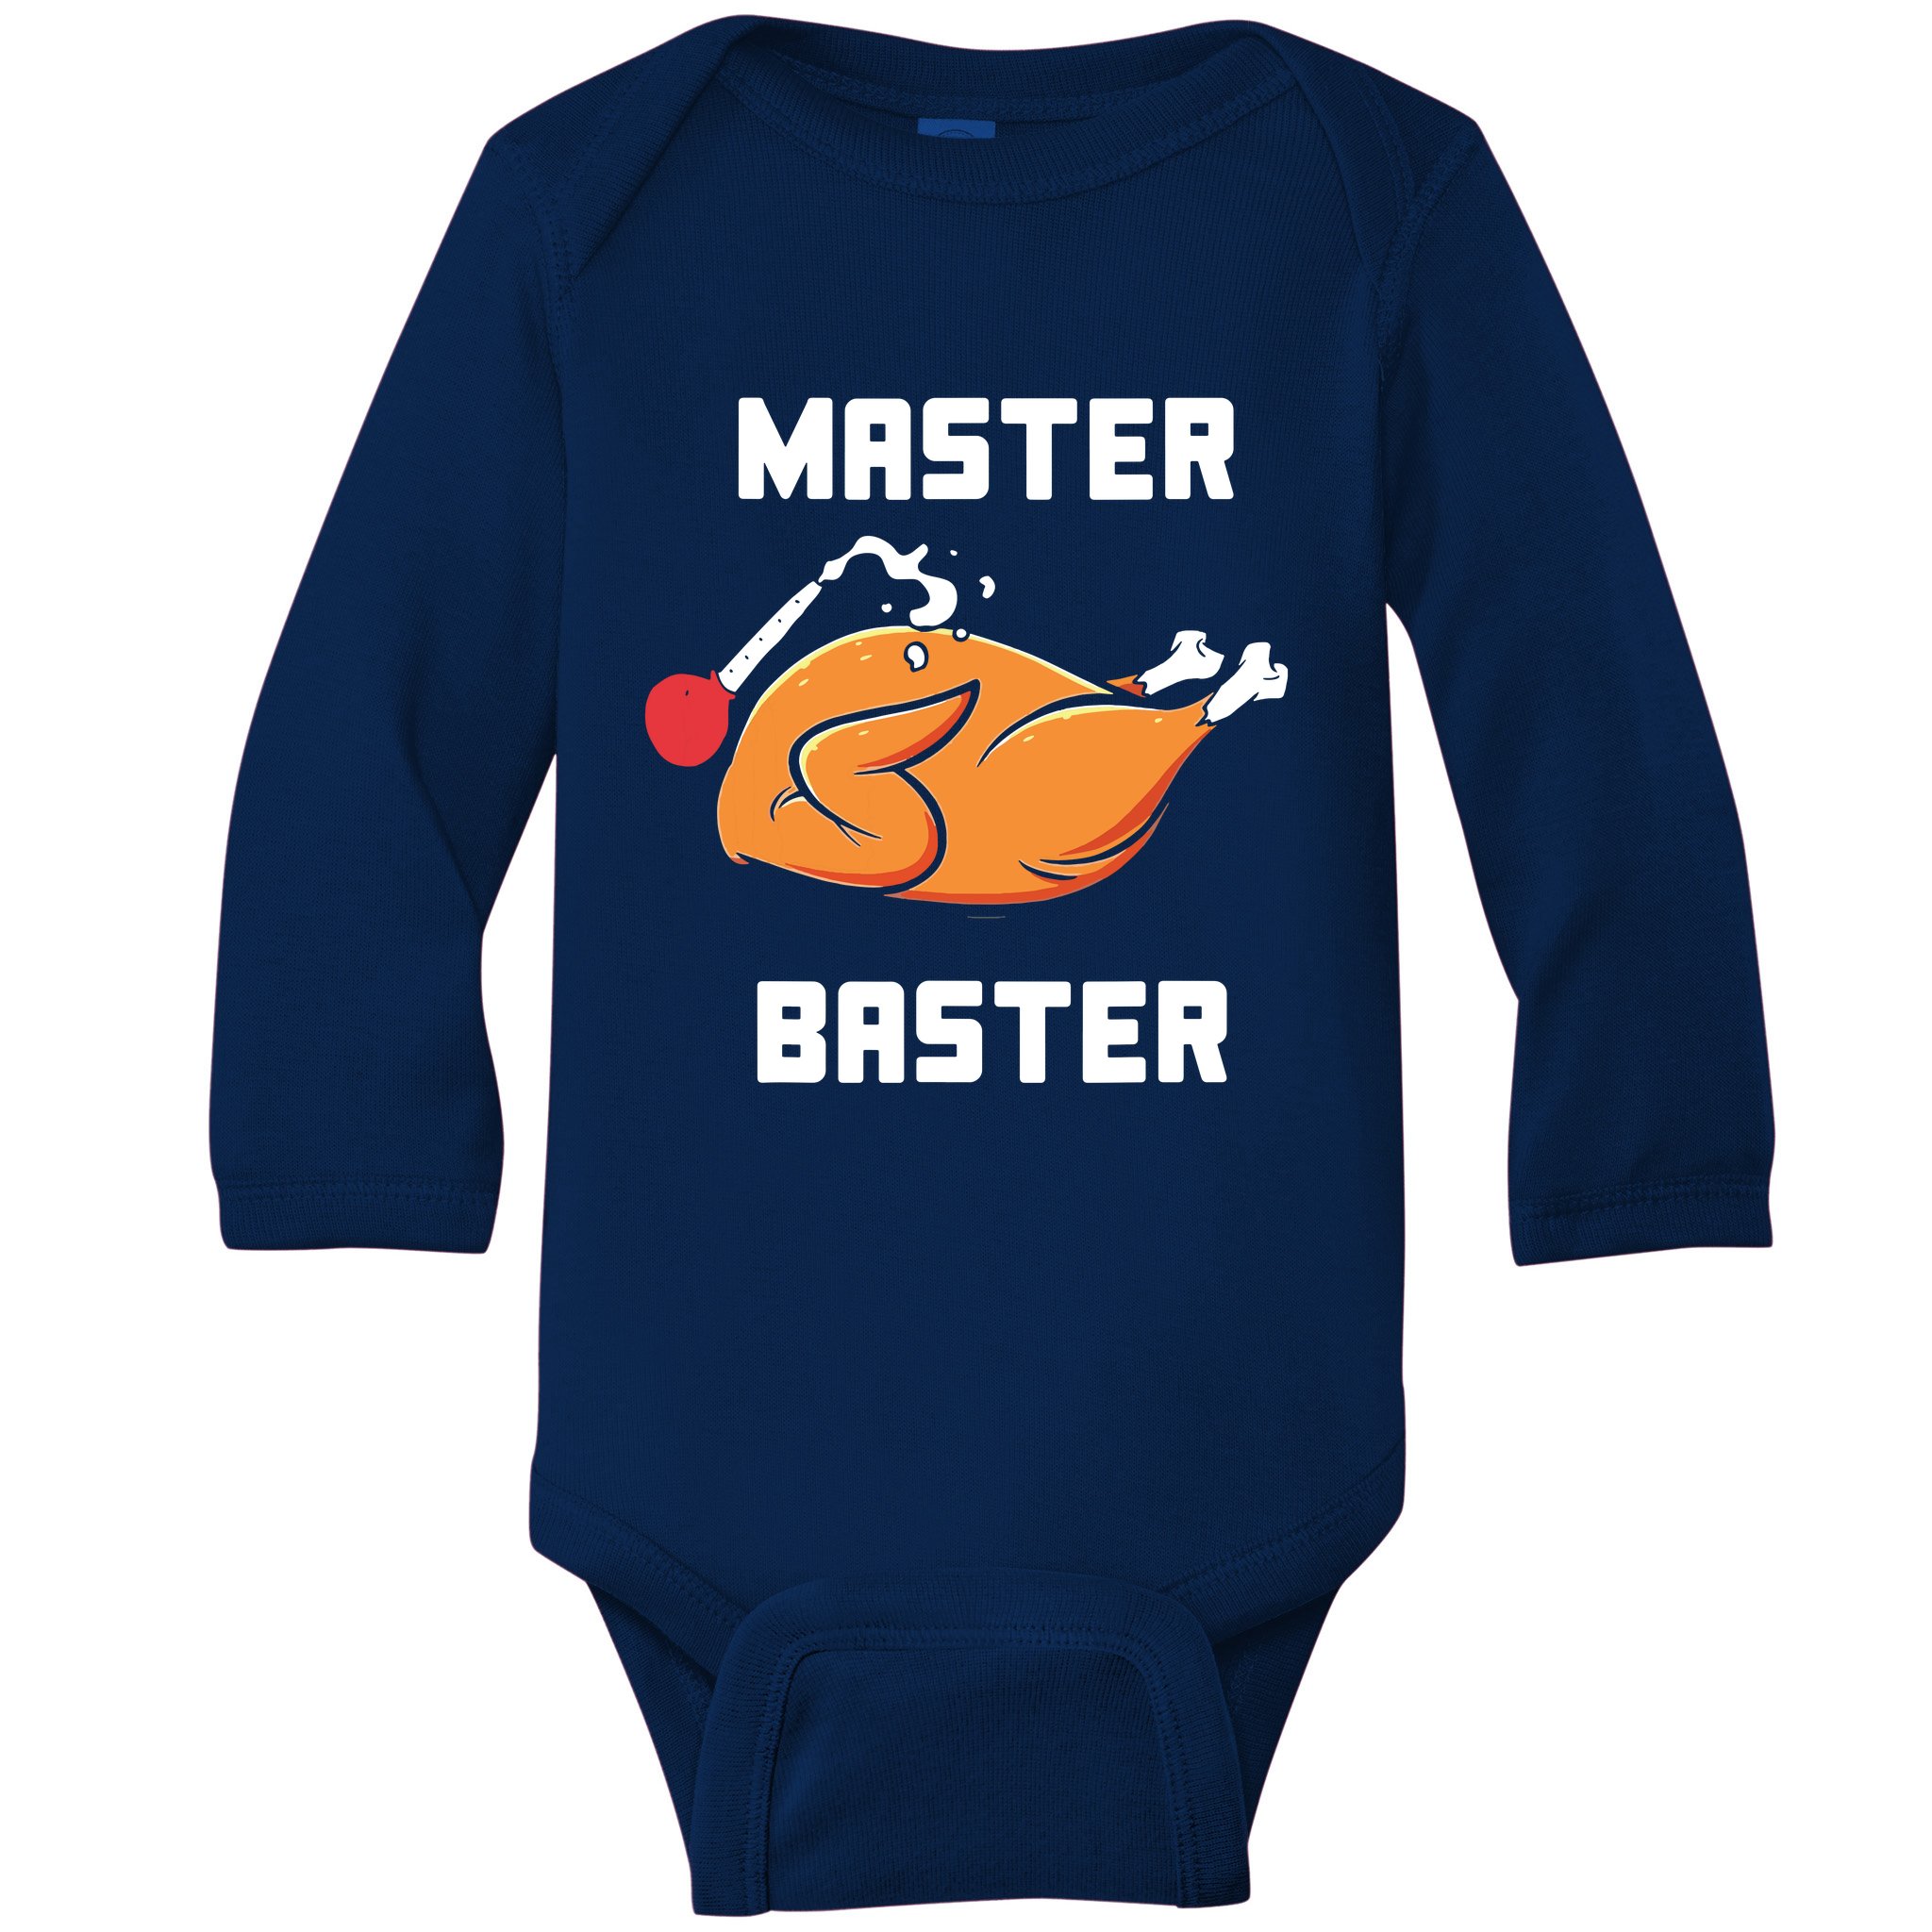 https://images3.teeshirtpalace.com/images/productImages/mbf5673572-master-baster-funny-turkey-baster-thanksgiving--navy-lss-garment.jpg